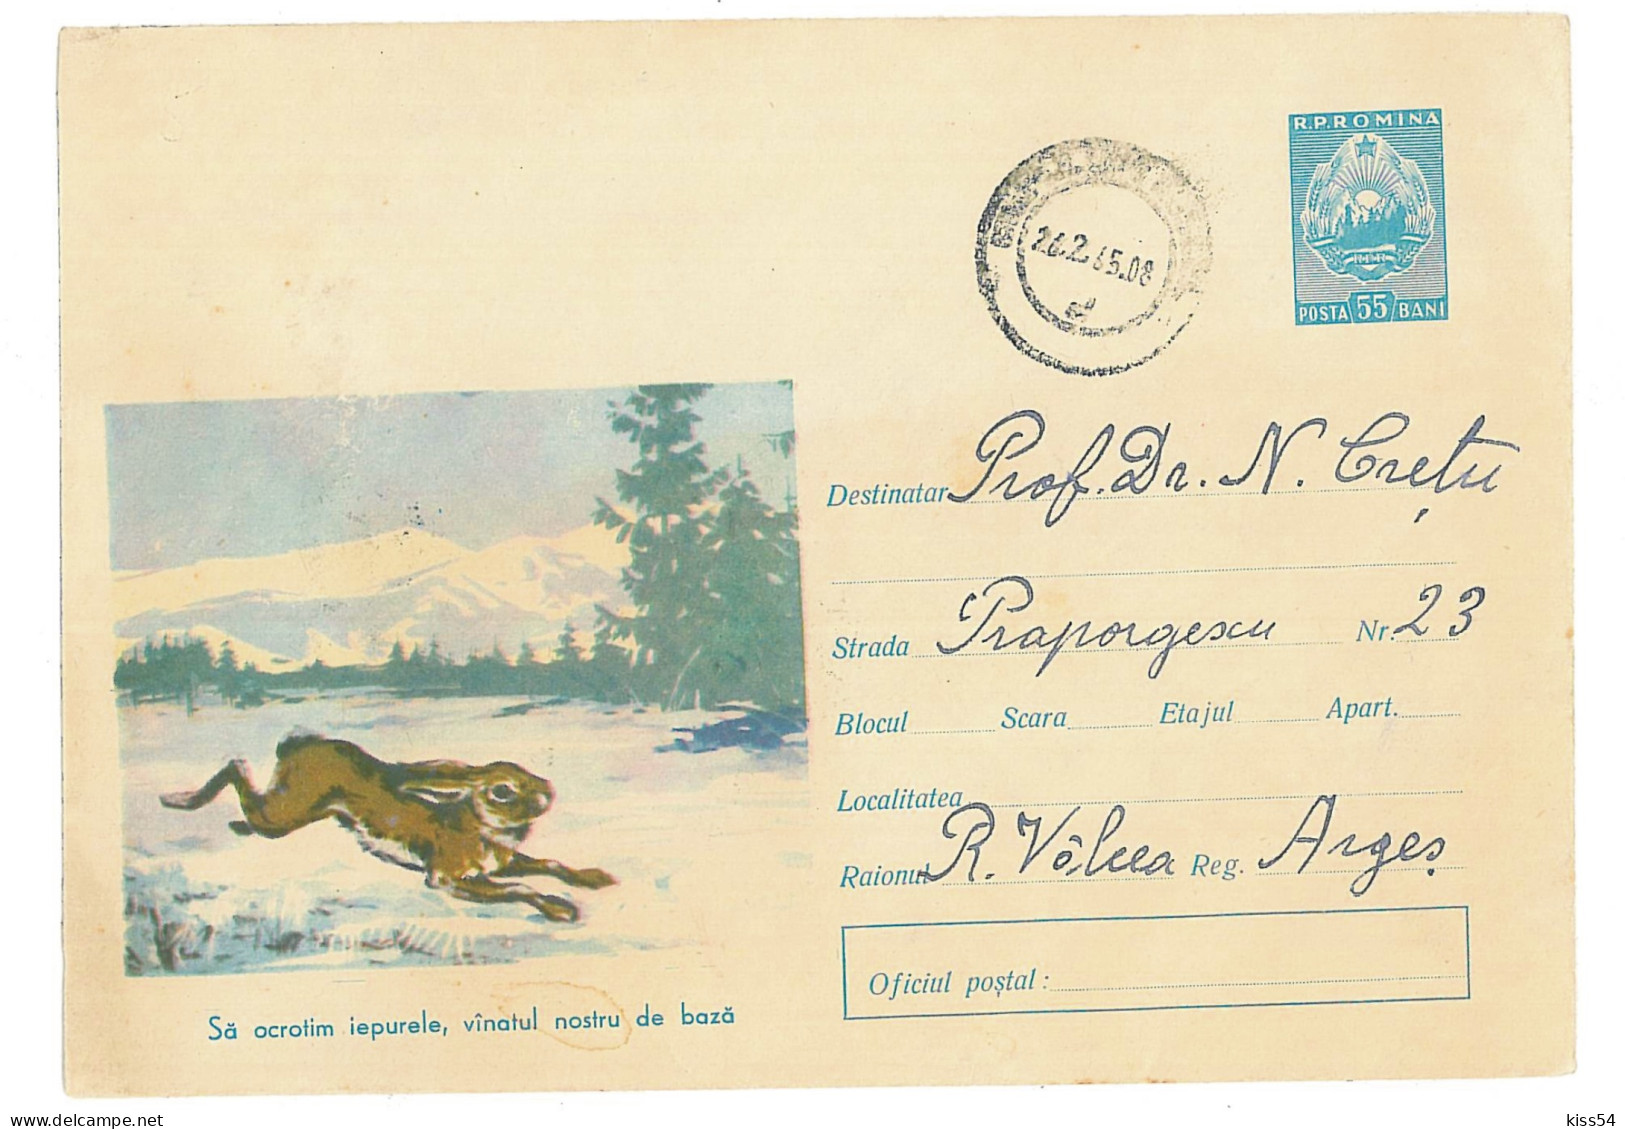 IP 64 A - 046a RABBIT, Winter, Romania - Stationery - Used - 1964 - Conejos